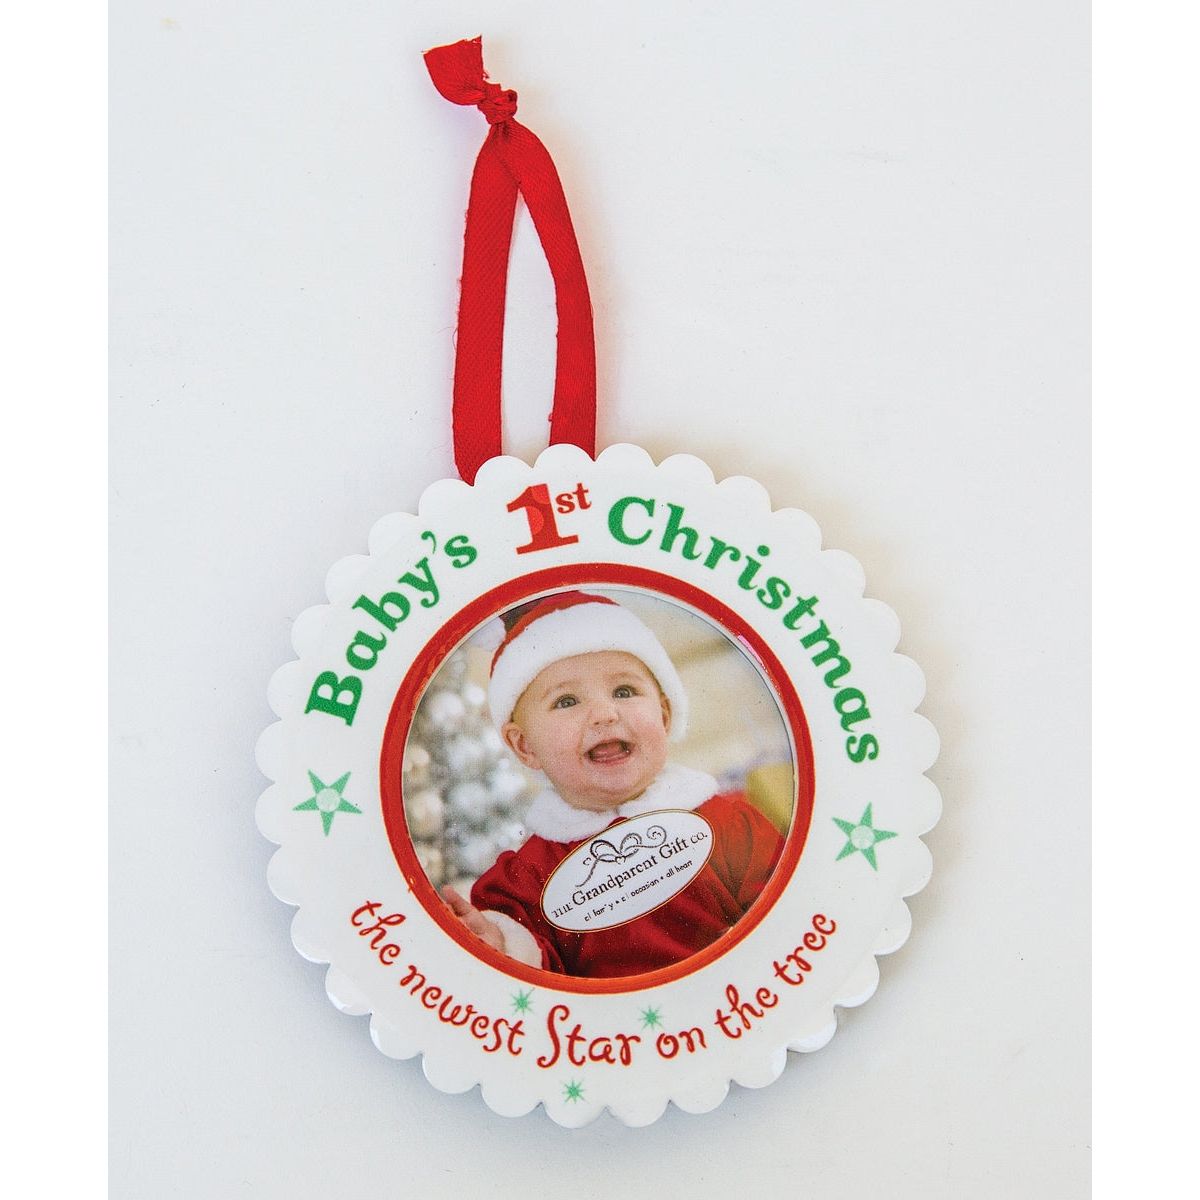 Baby&#39;s 1st Christmas ornament with red ribbon for hanging.